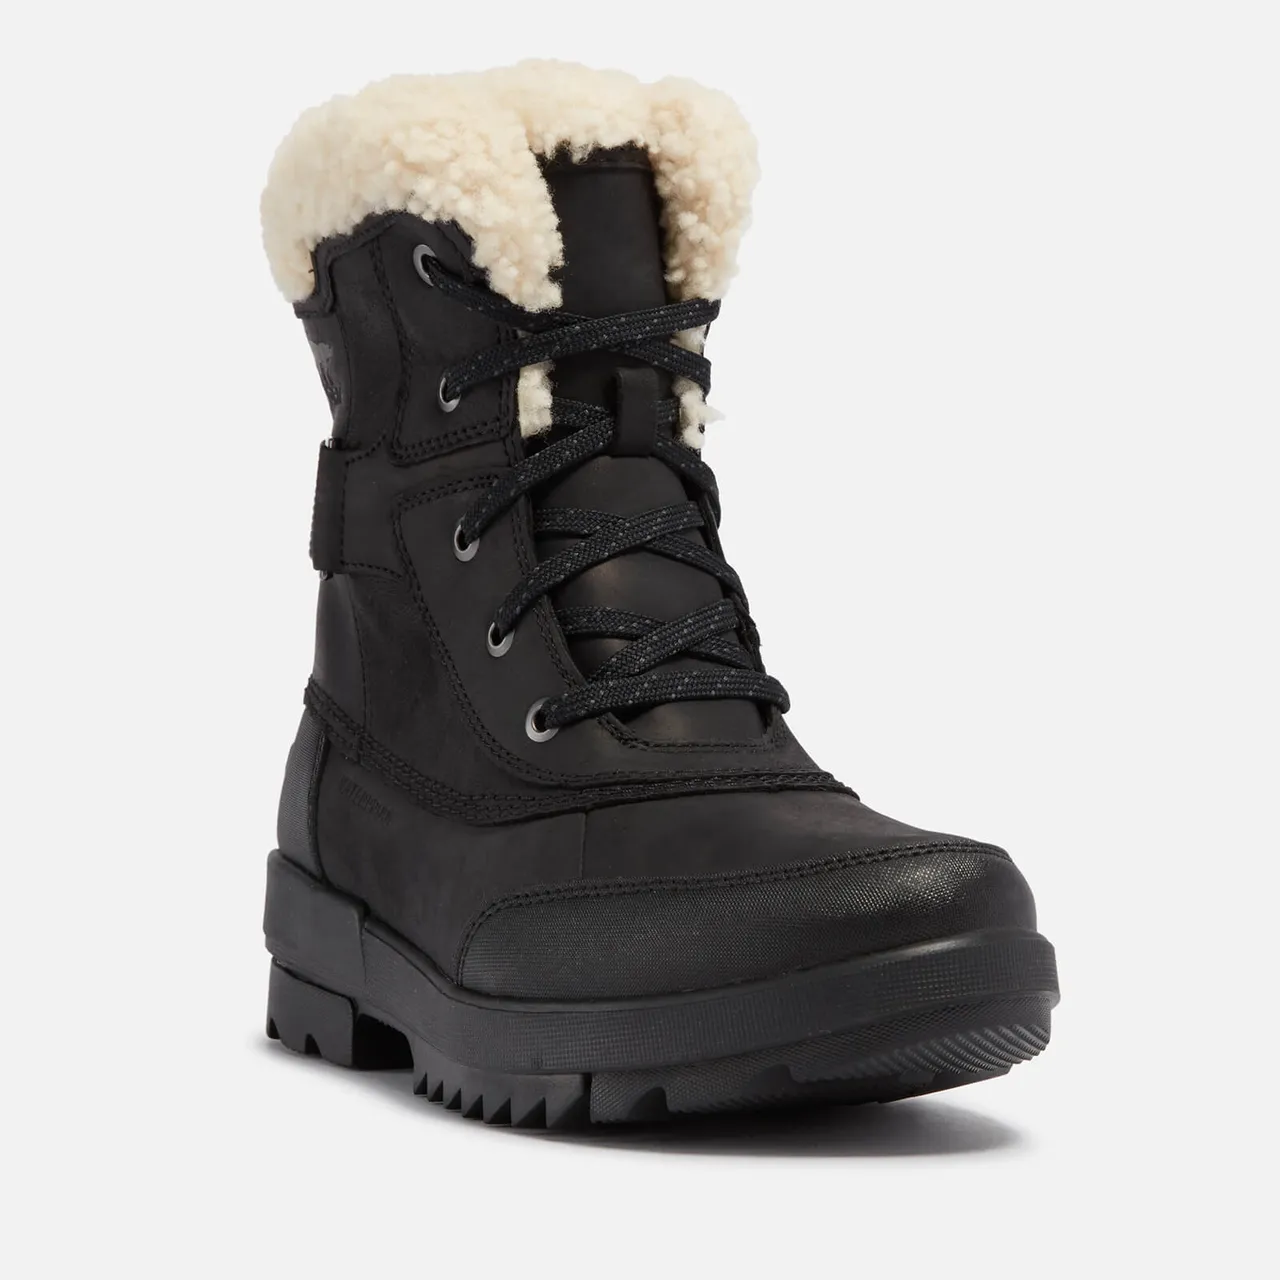 Sorel Torino Ii Parc Shearling, Rubber and Leather Boots